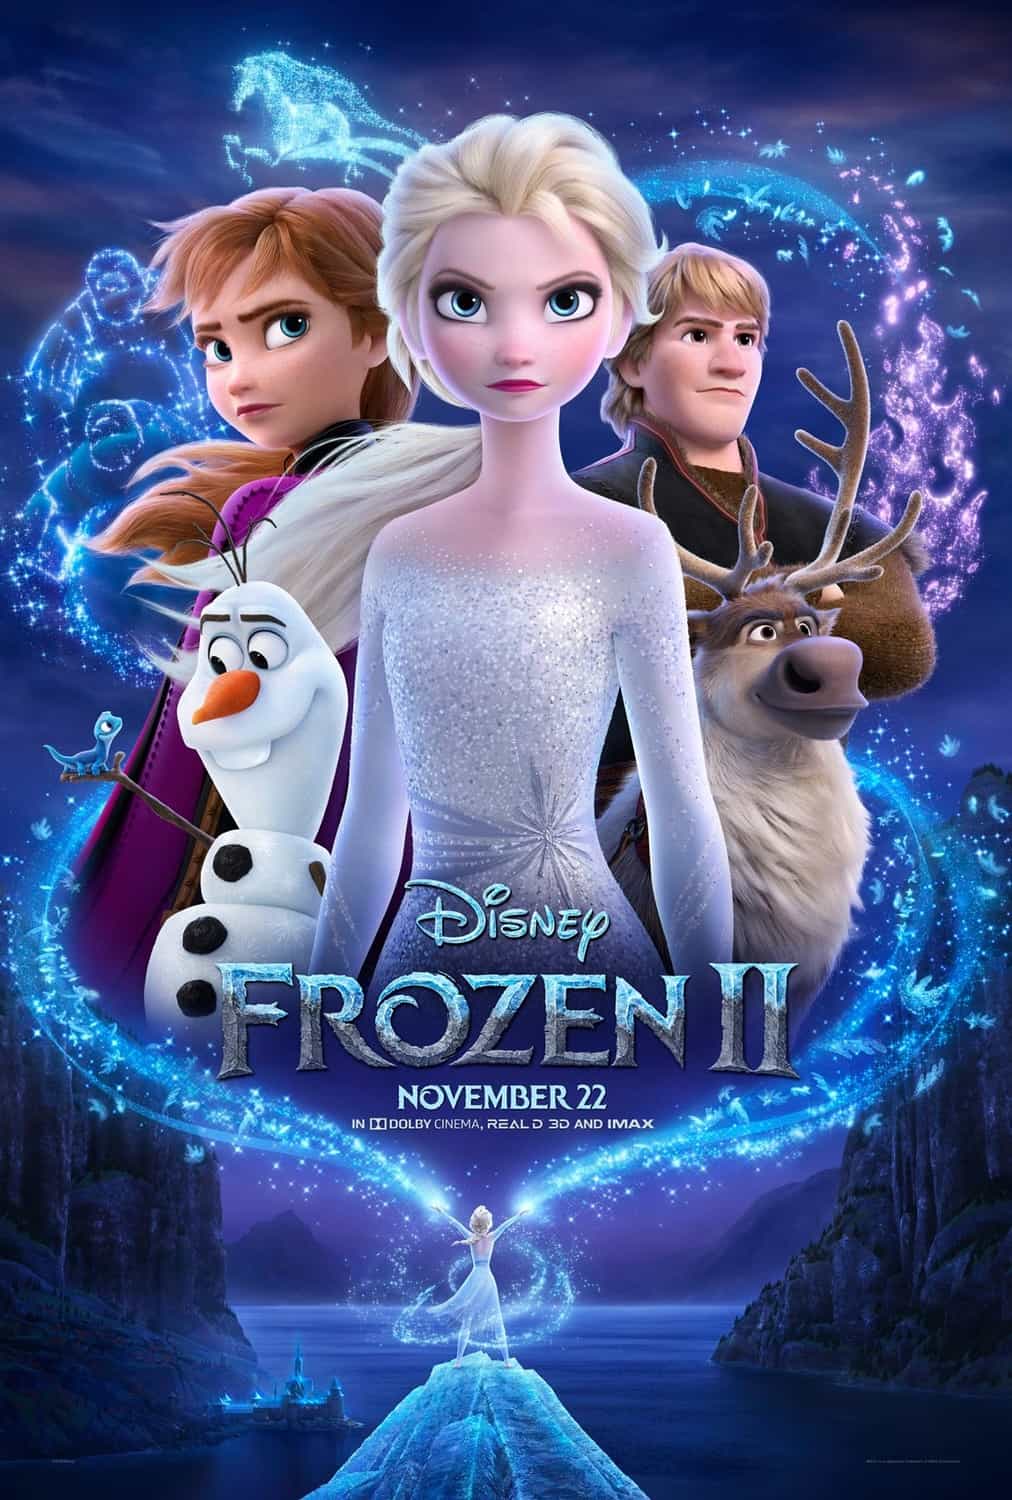 Things are looking a little less frozen in the first teaser from Disneys Frozen II - Check out the new poster as well!